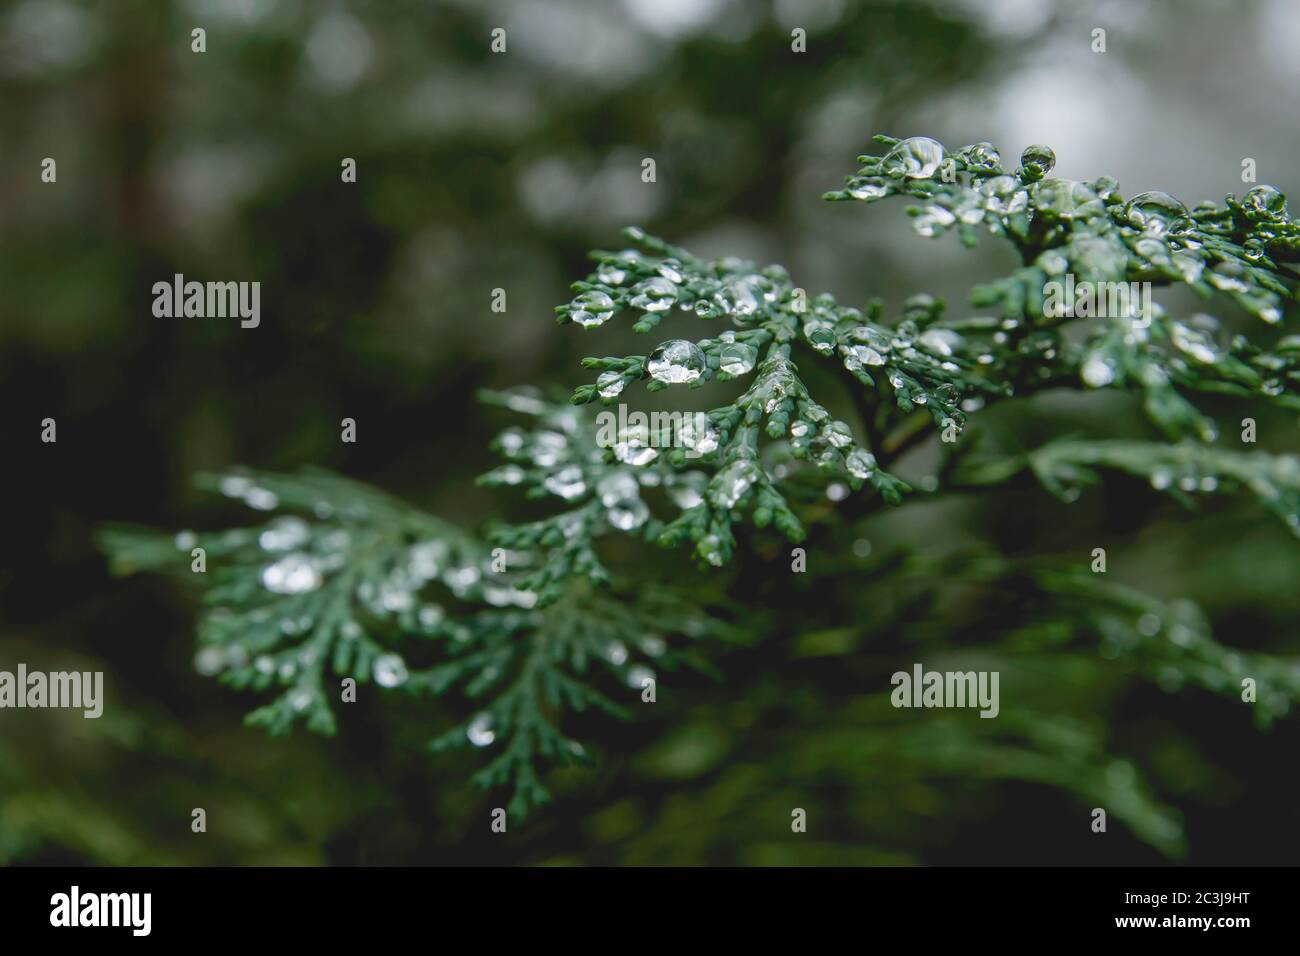 Waterdrops on thuja leaf Stock Photo